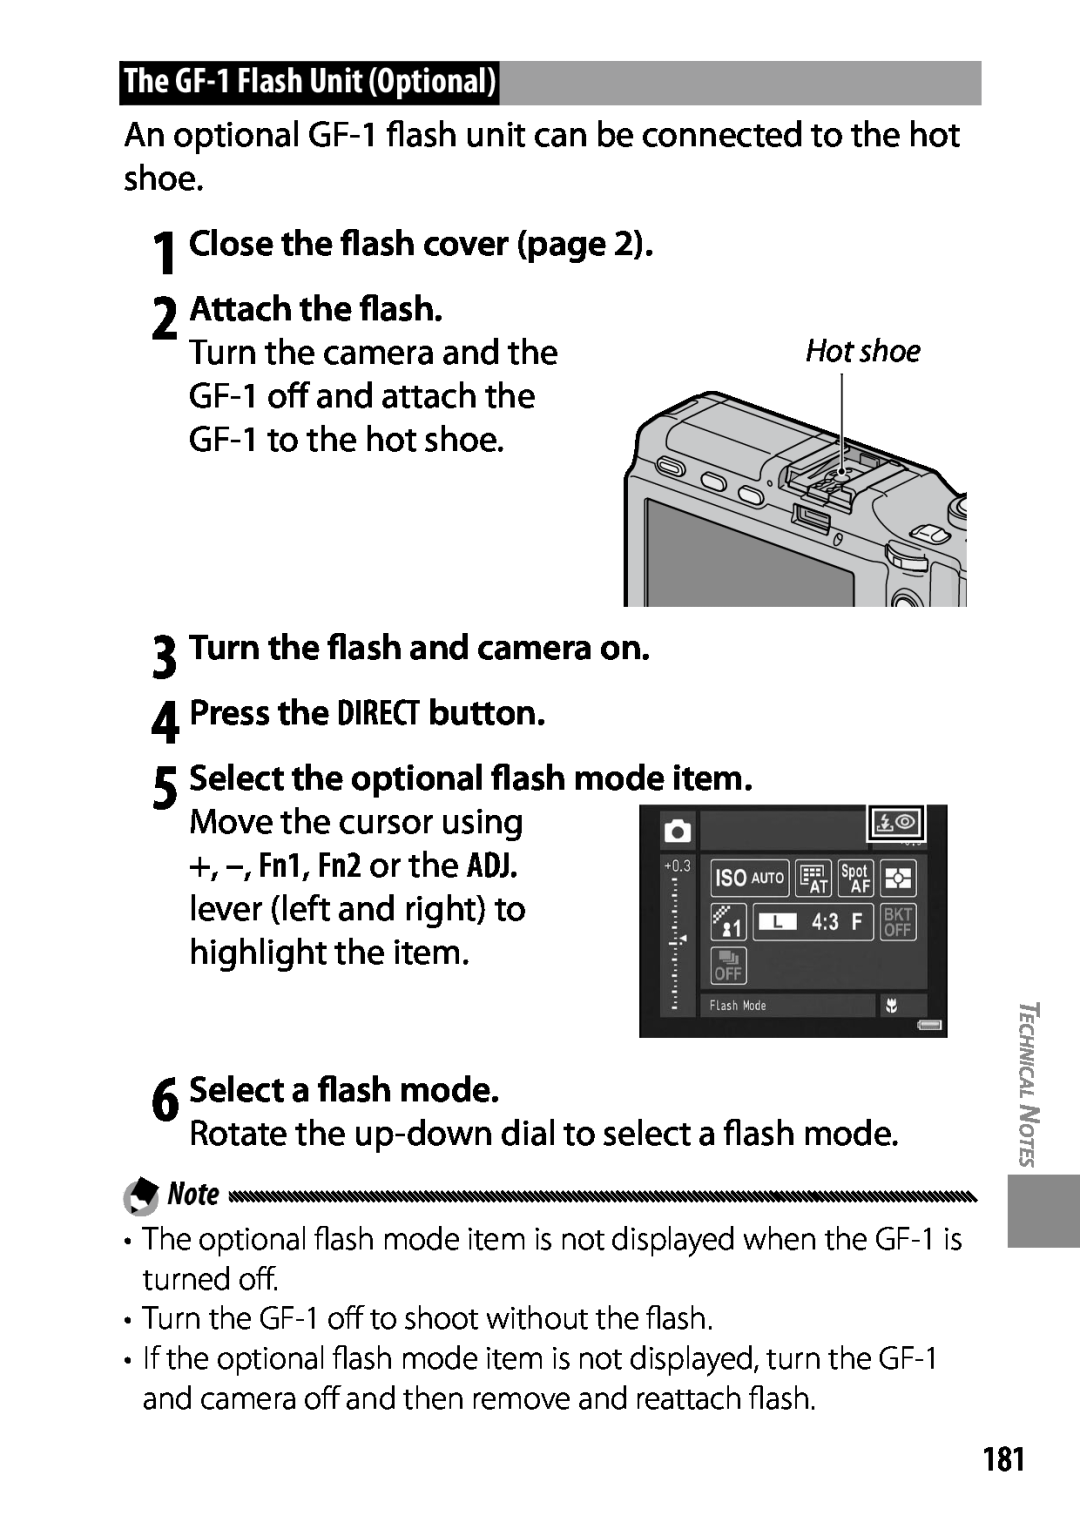 Ricoh 170543 The GF-1 Flash Unit Optional, Close the flash cover page, Attach the flash, +, -, Fn1, Fn2 or the ADJ, mode 